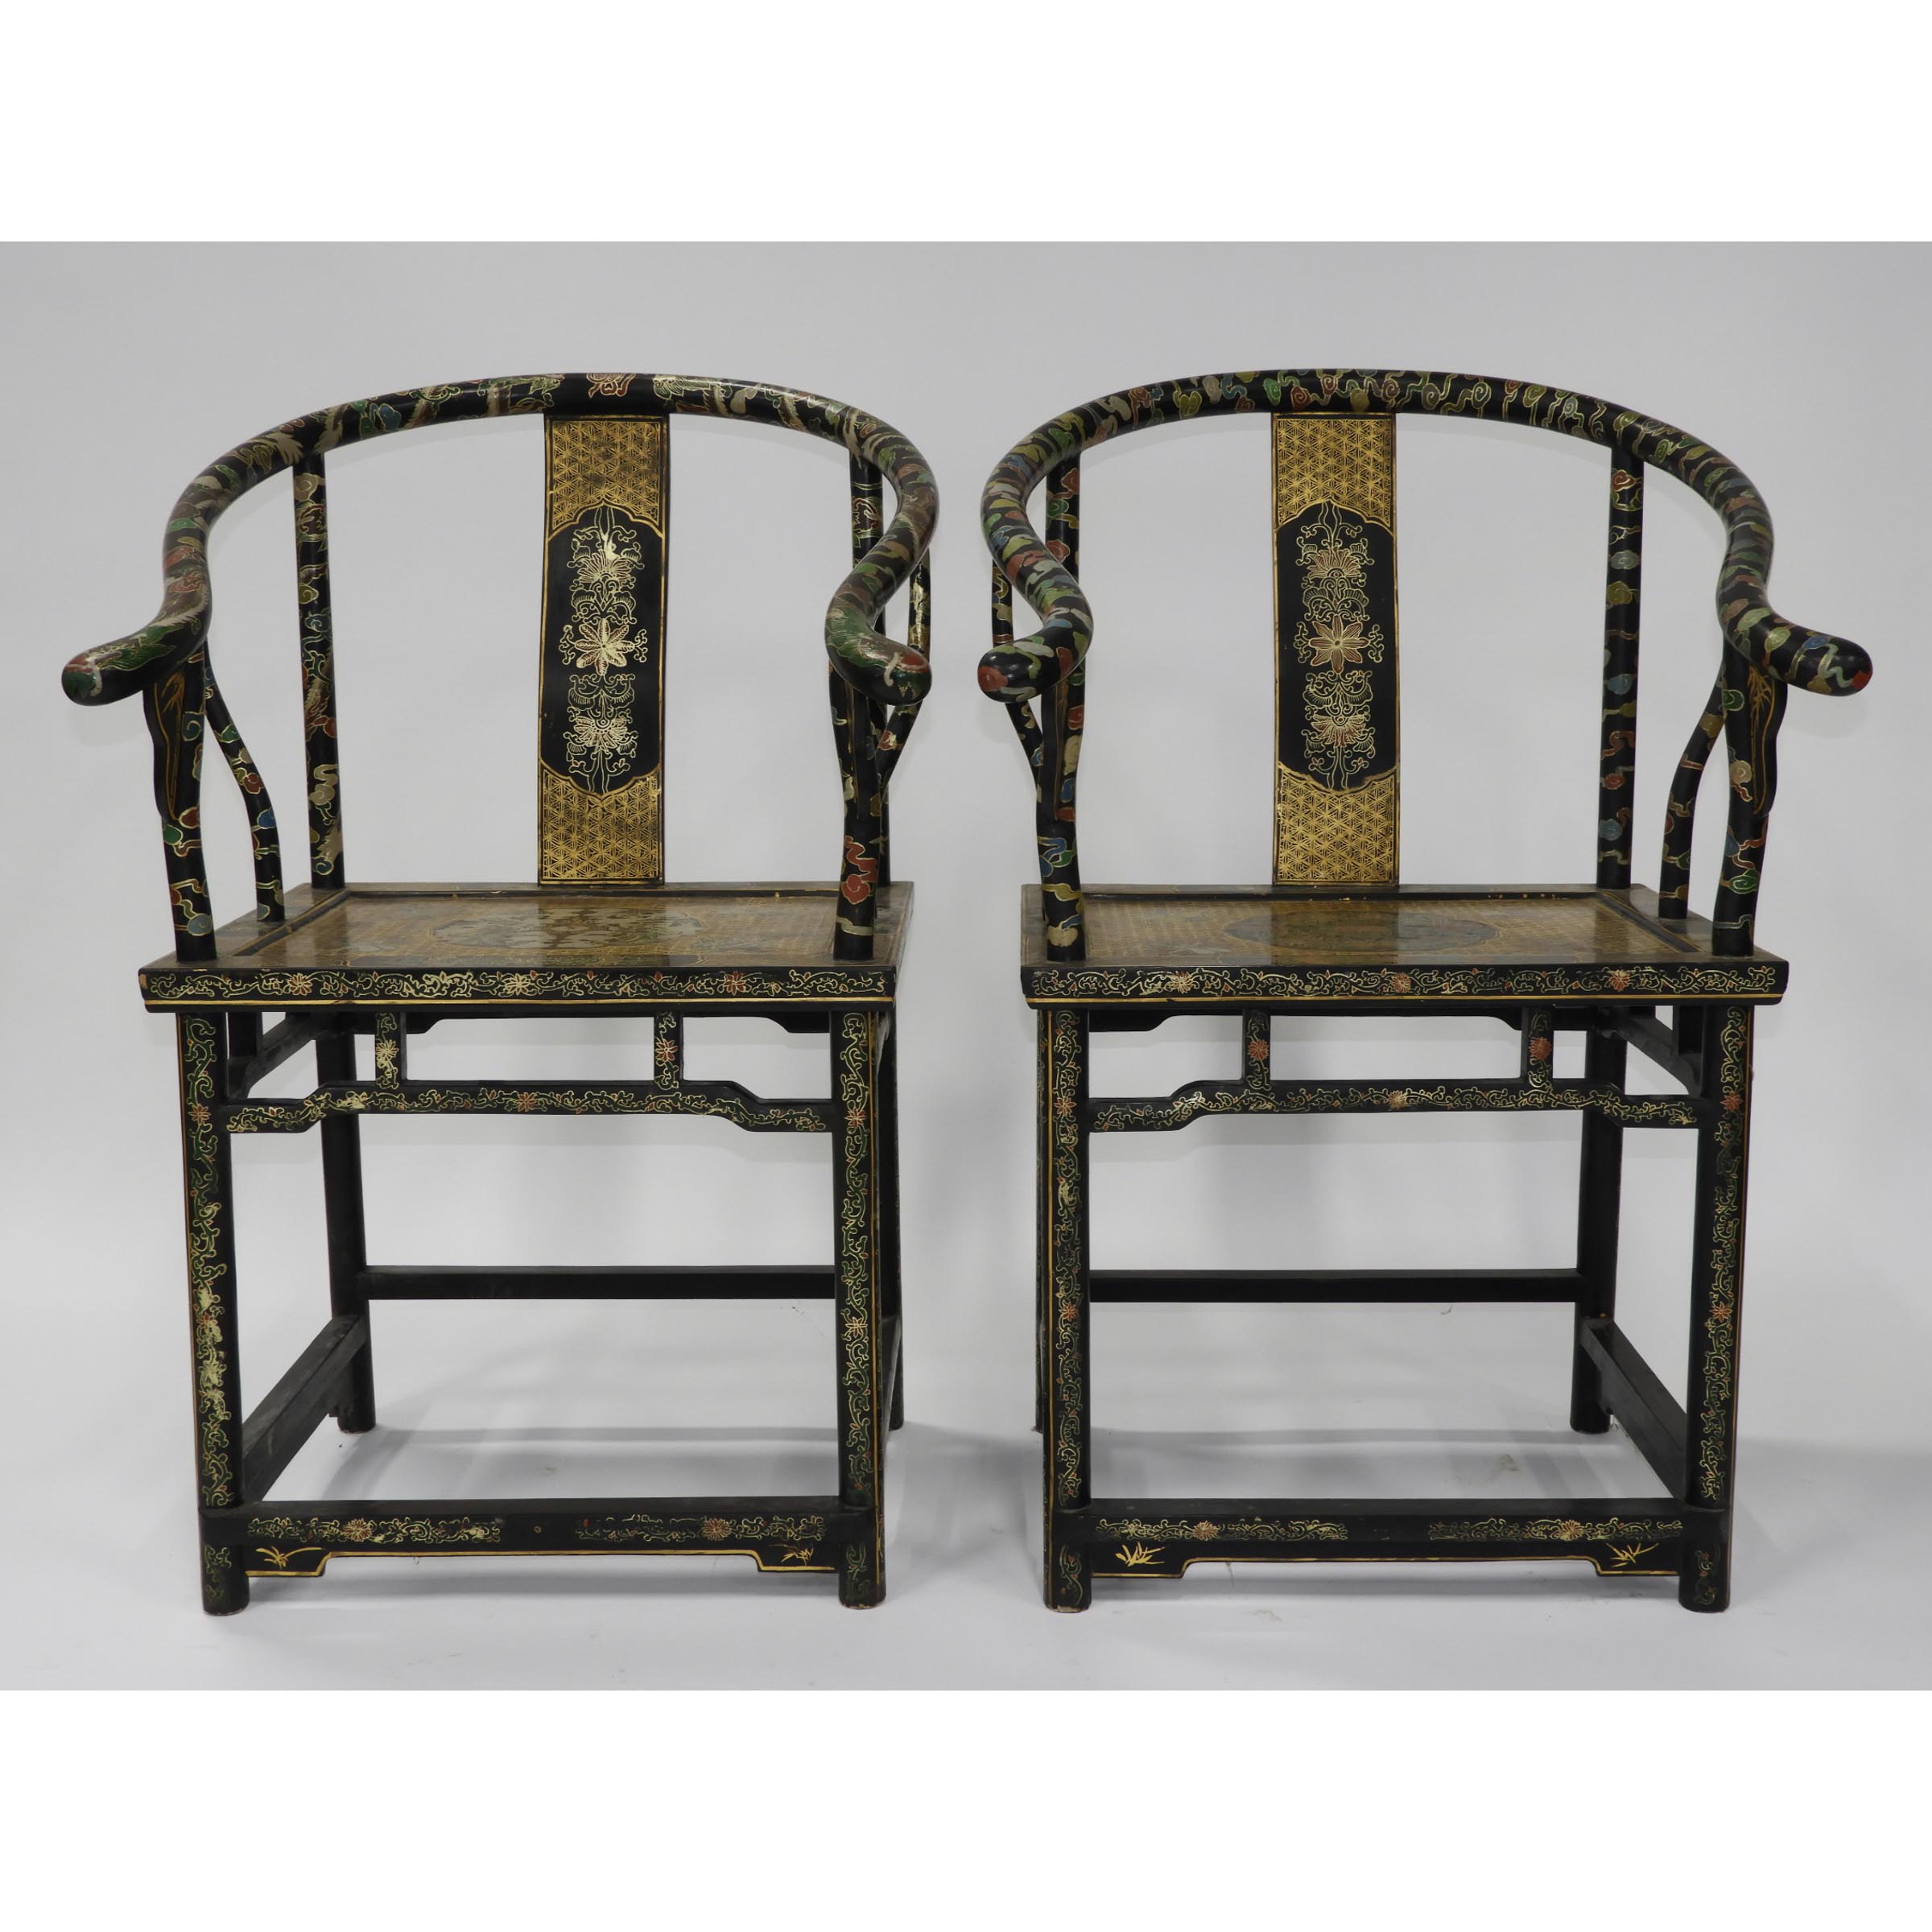 A Pair of Black Lacquer Horseshoe-Back Armchairs